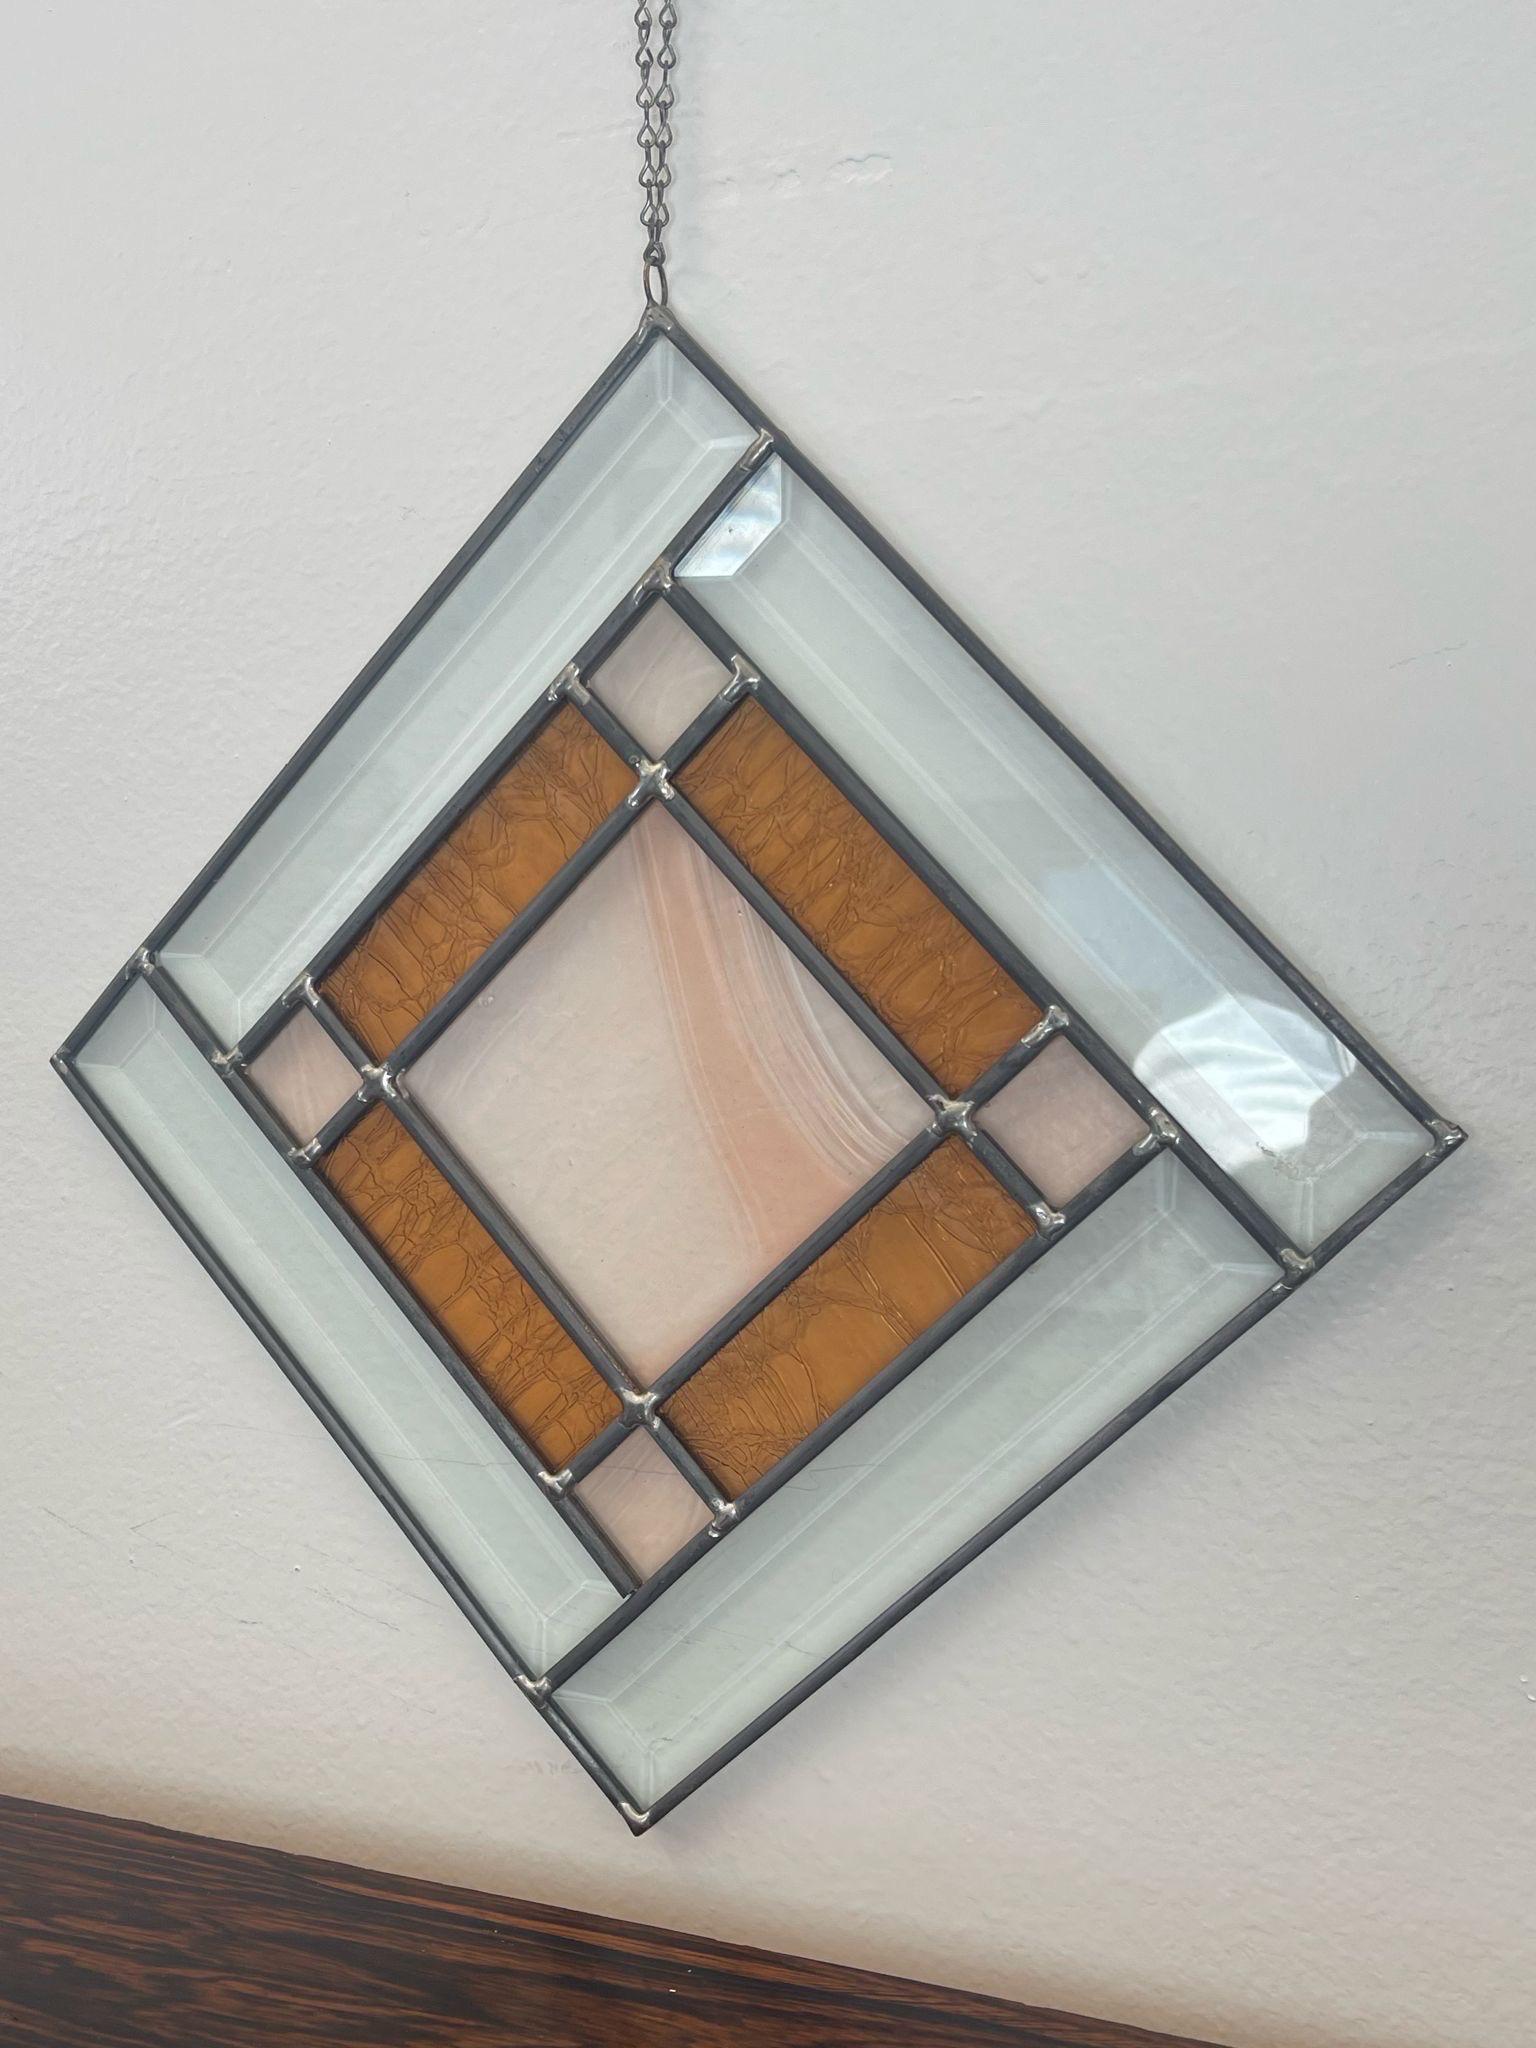 Square shaped stain glass Art with orange toned Accents. Beveled clear glass as the border. Vintage Condition Consistent with Age as Pictured.

Dimensions. 10 W ; 1/4 D ; 10 H